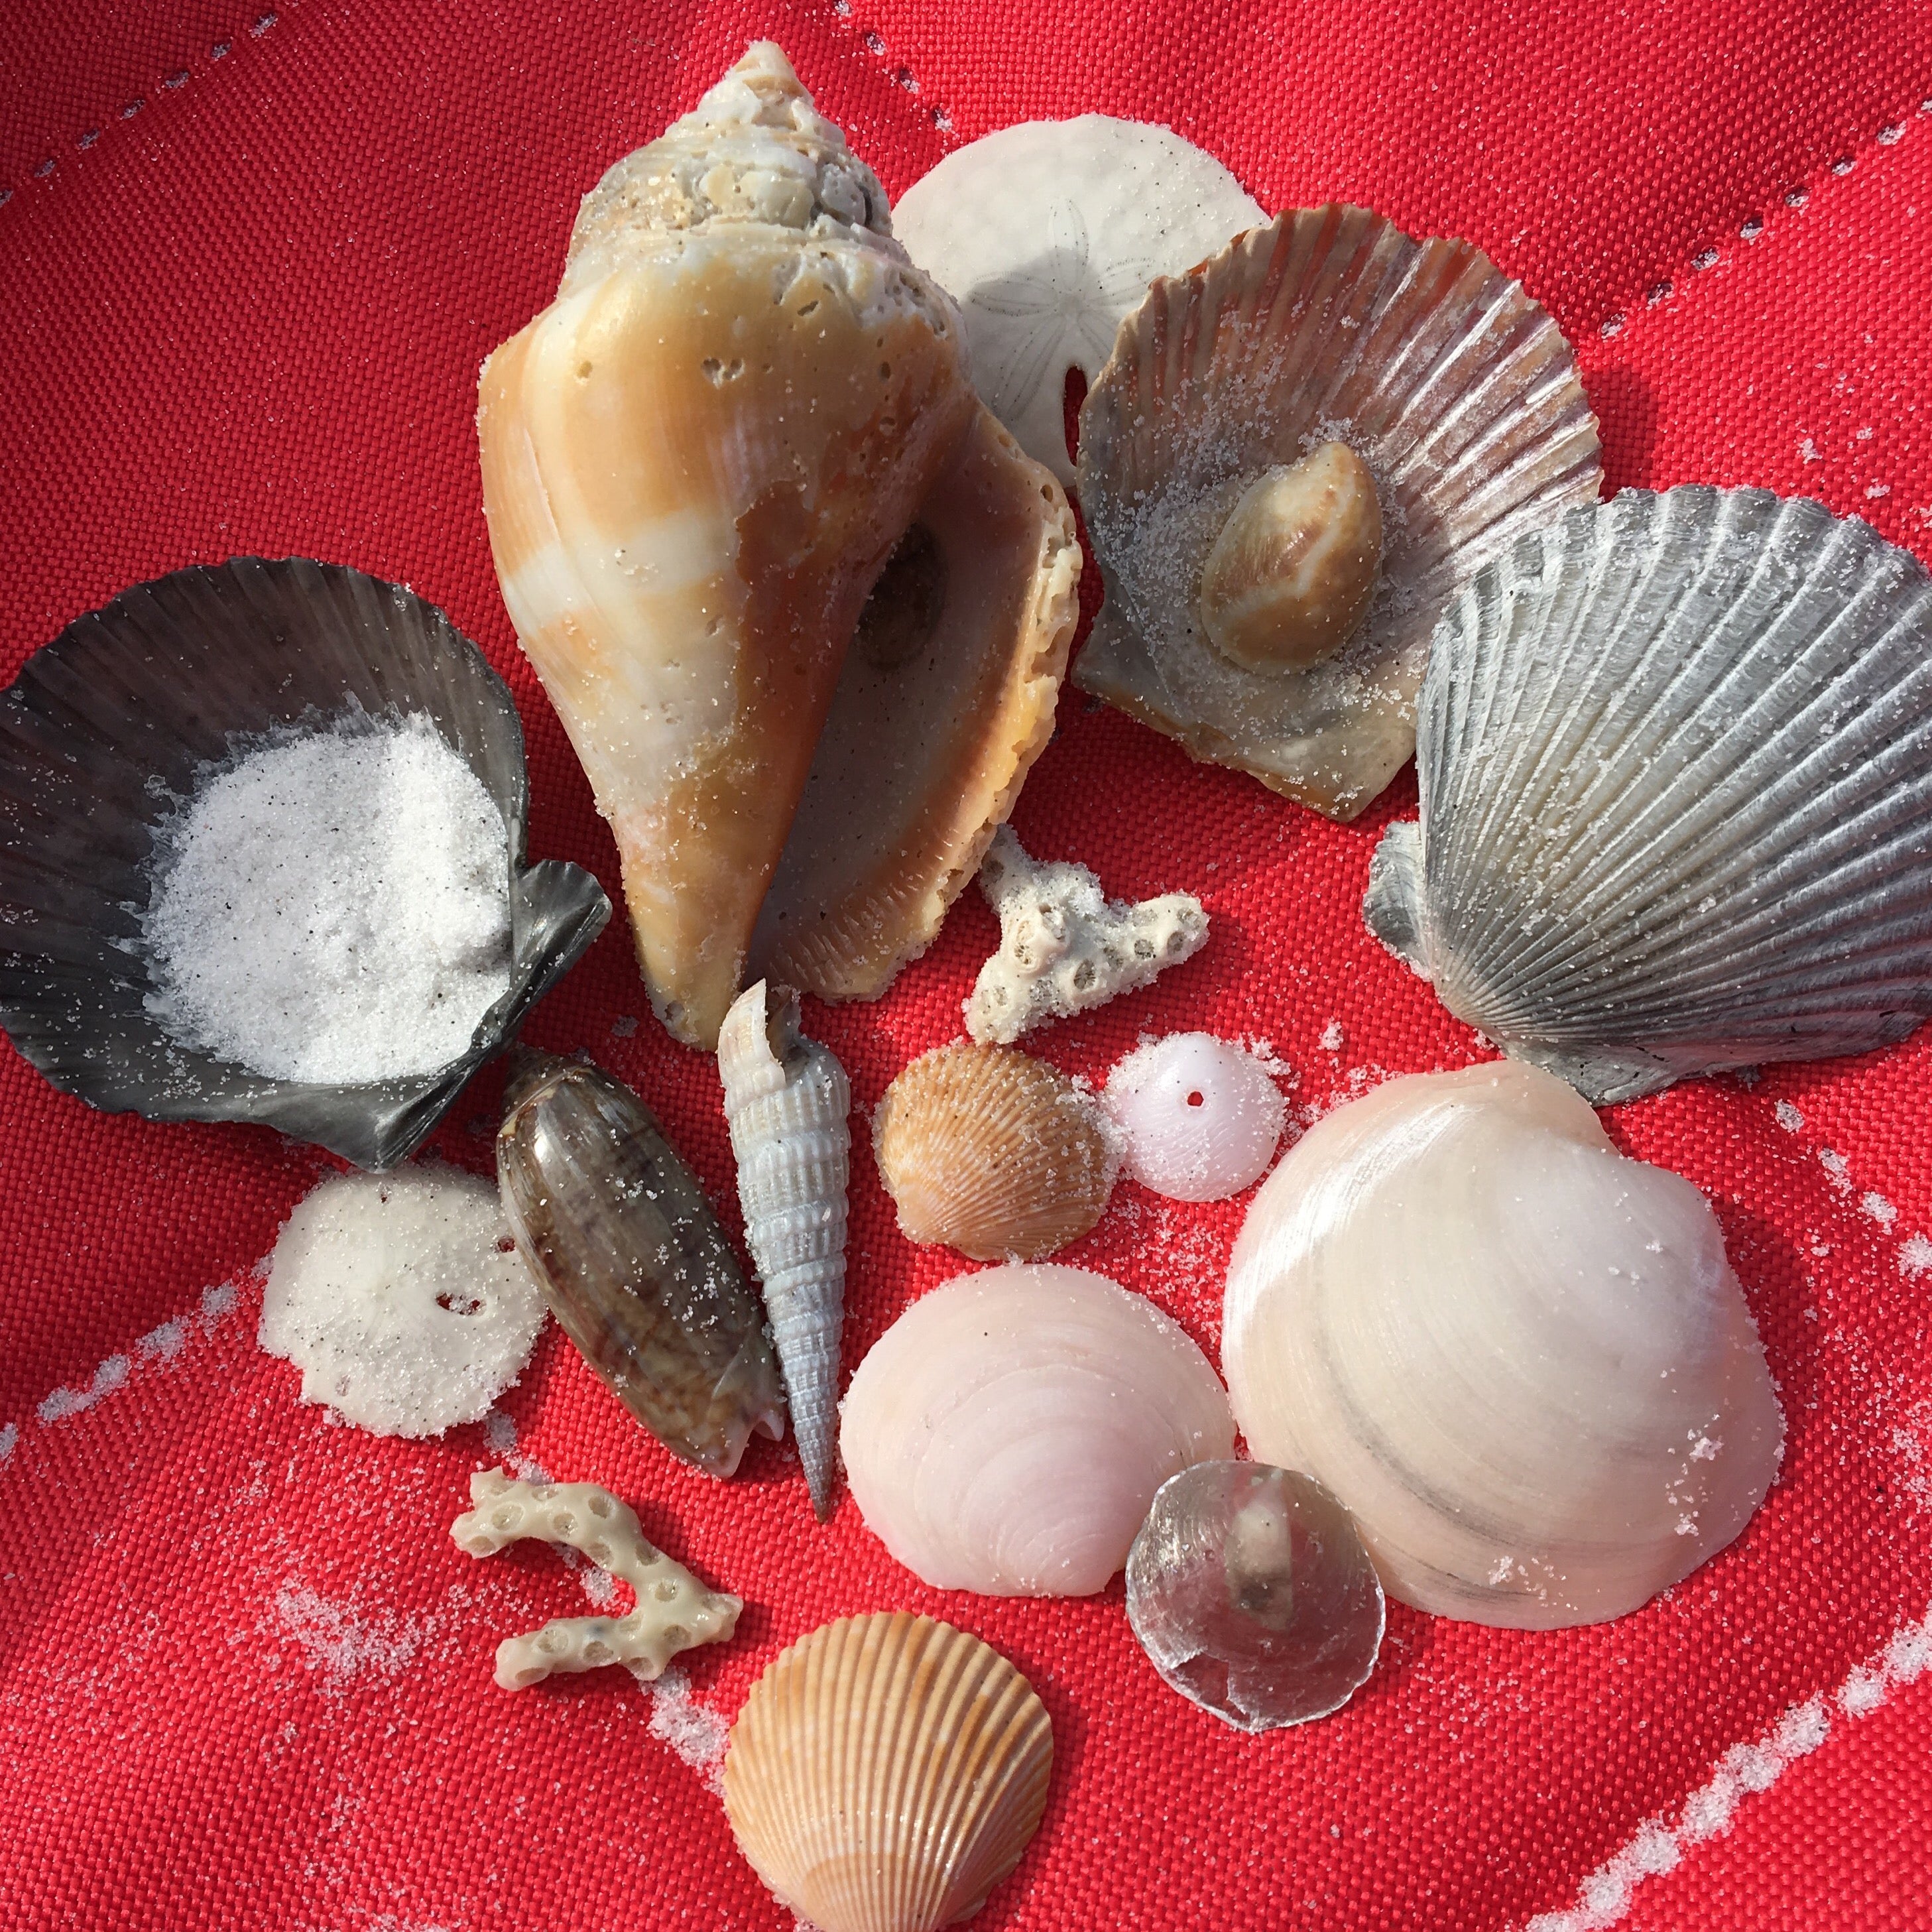 The area is wonderful for shell hunting! My girls had so much fun finding these beauties!